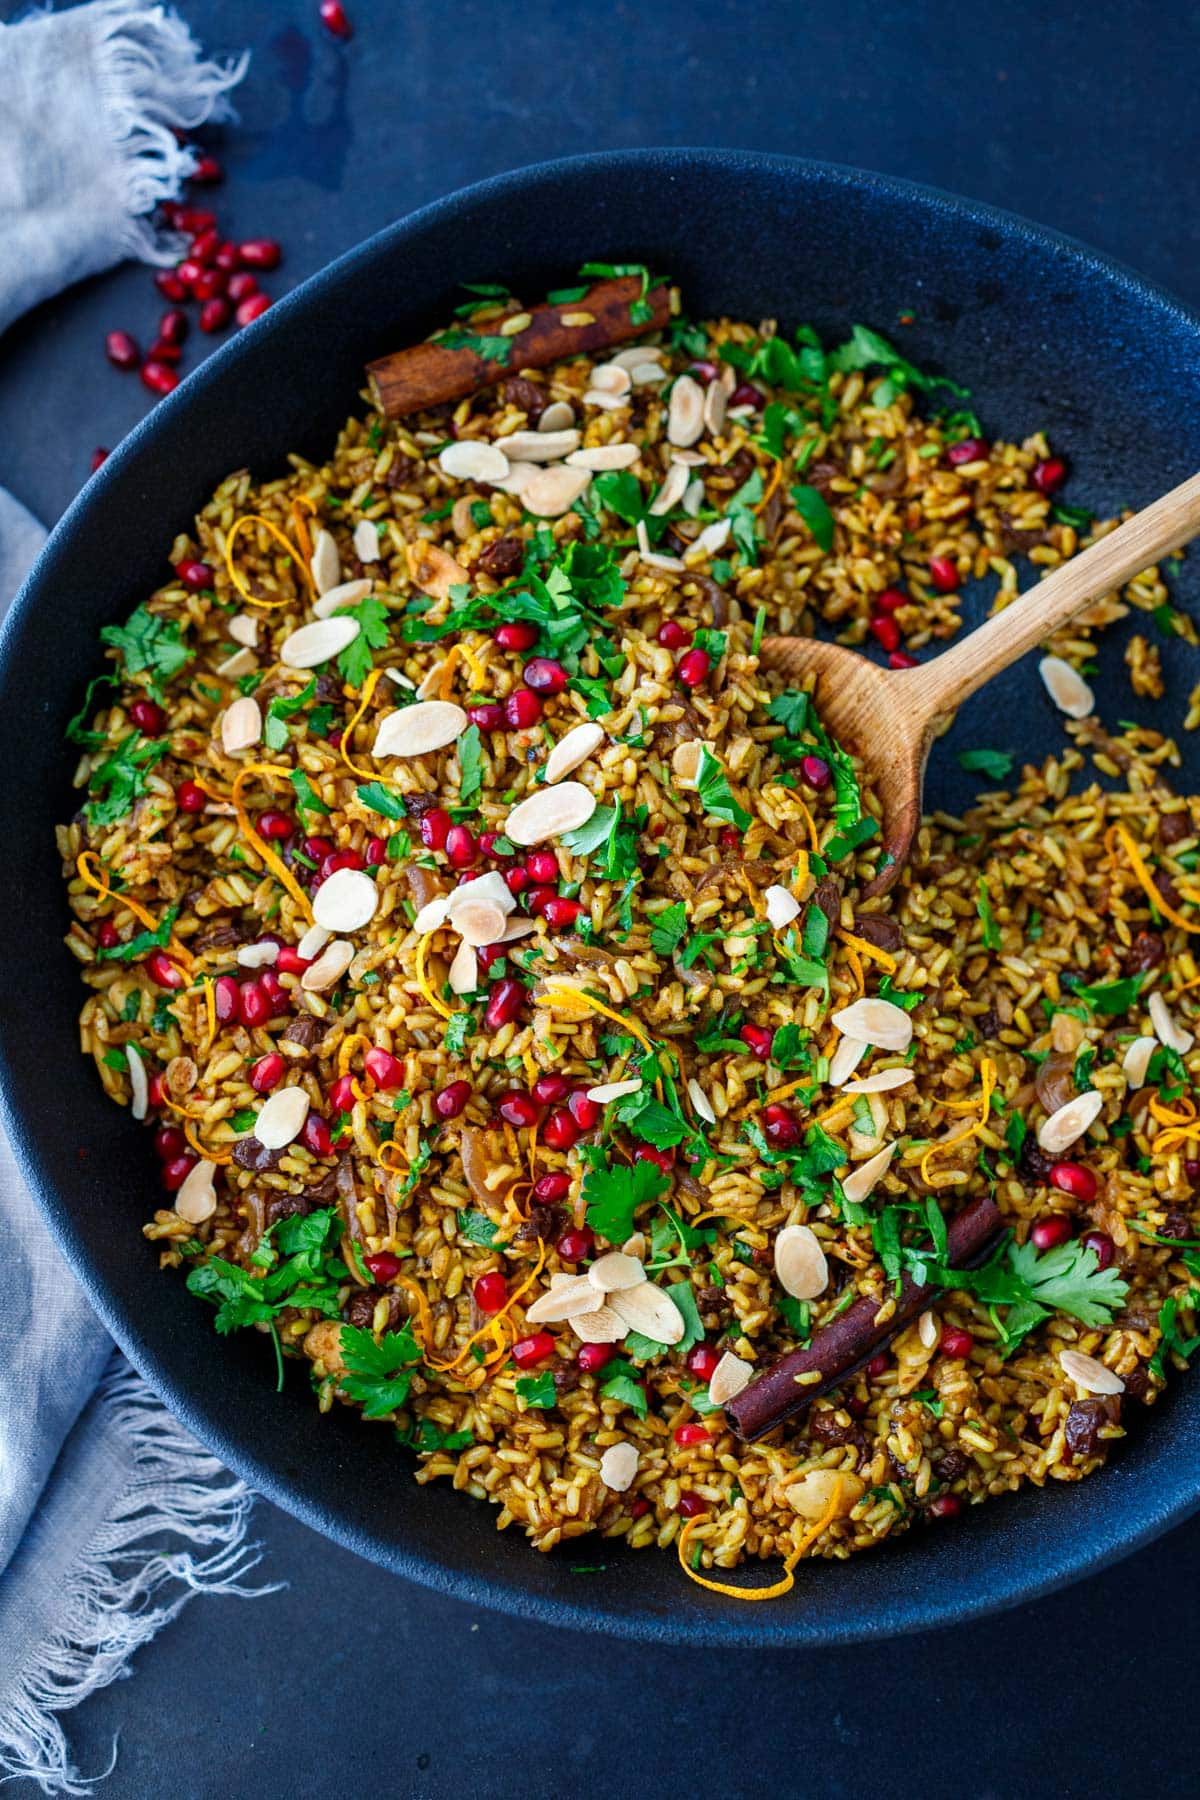 Moroccan rice pilaf in large skillet garnished with parsley, pomegranate seeds and slivered almonds.